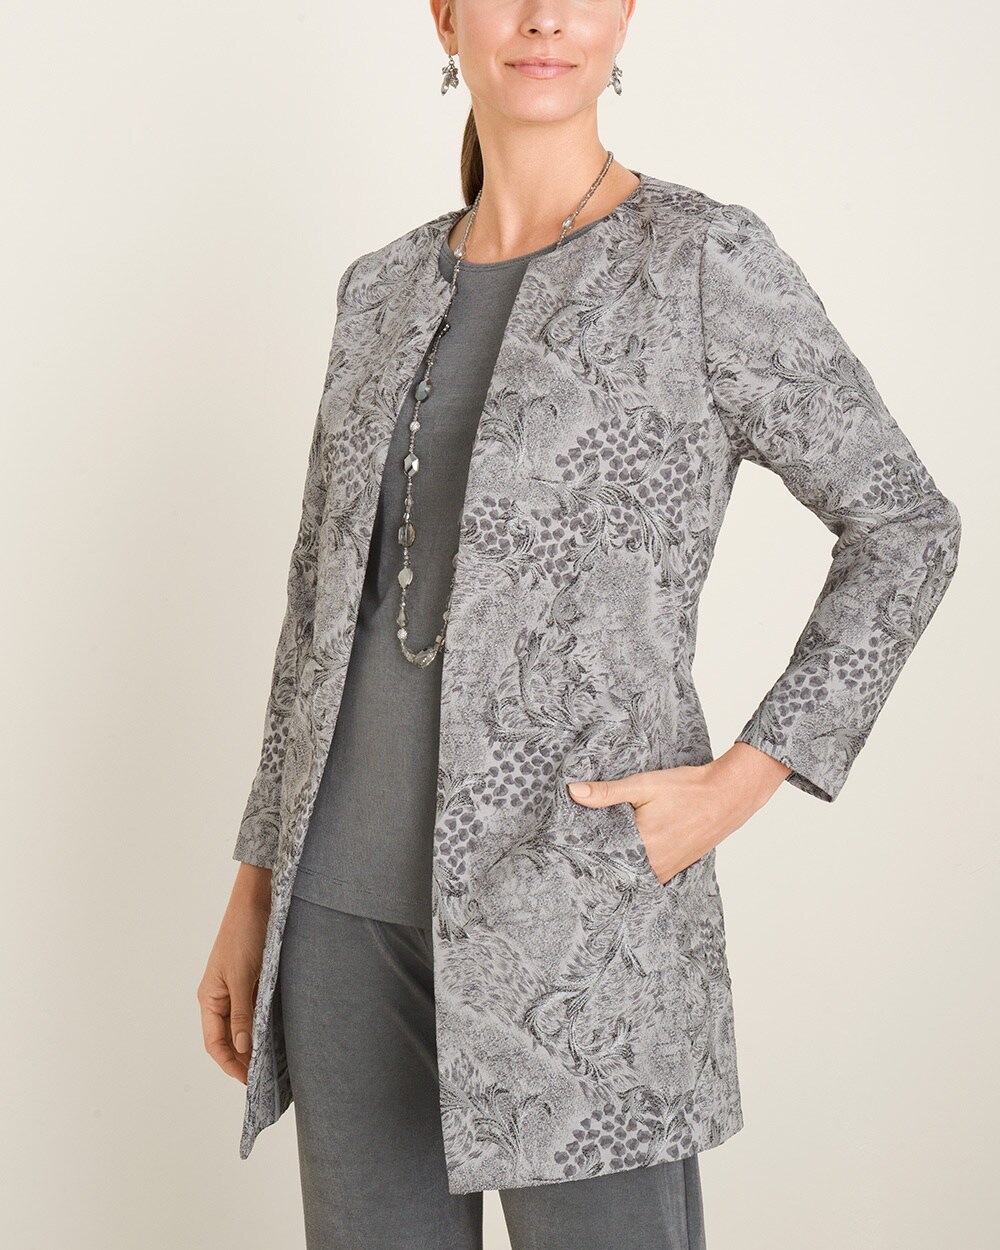 Travelers Collection Gray Printed Jacket